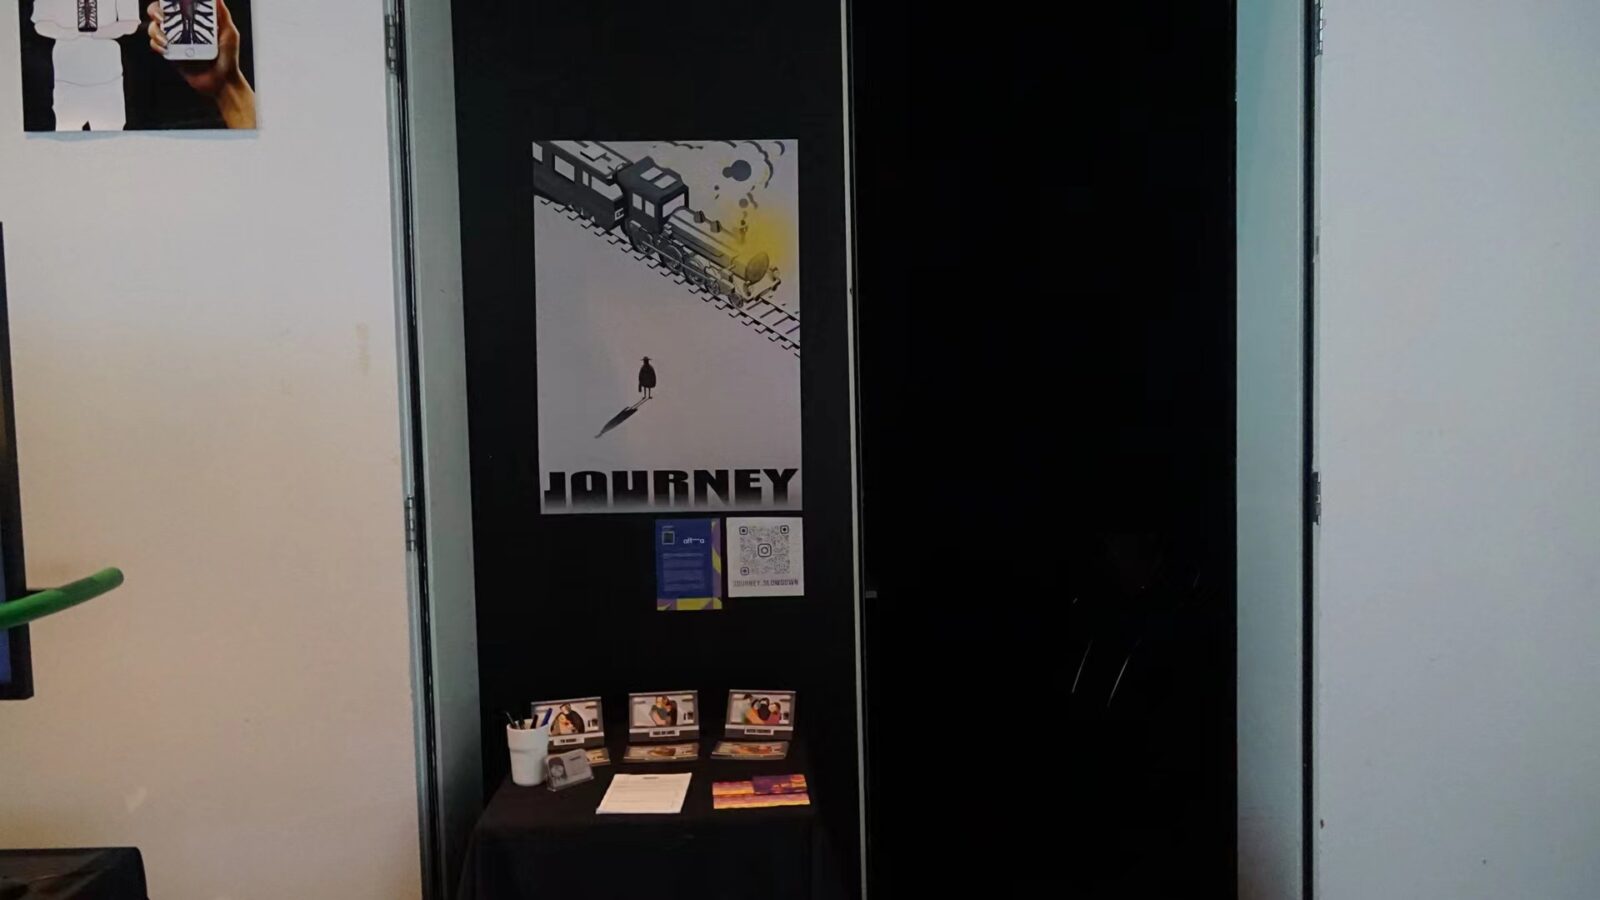 The poster is at the entry of JOURNEY.